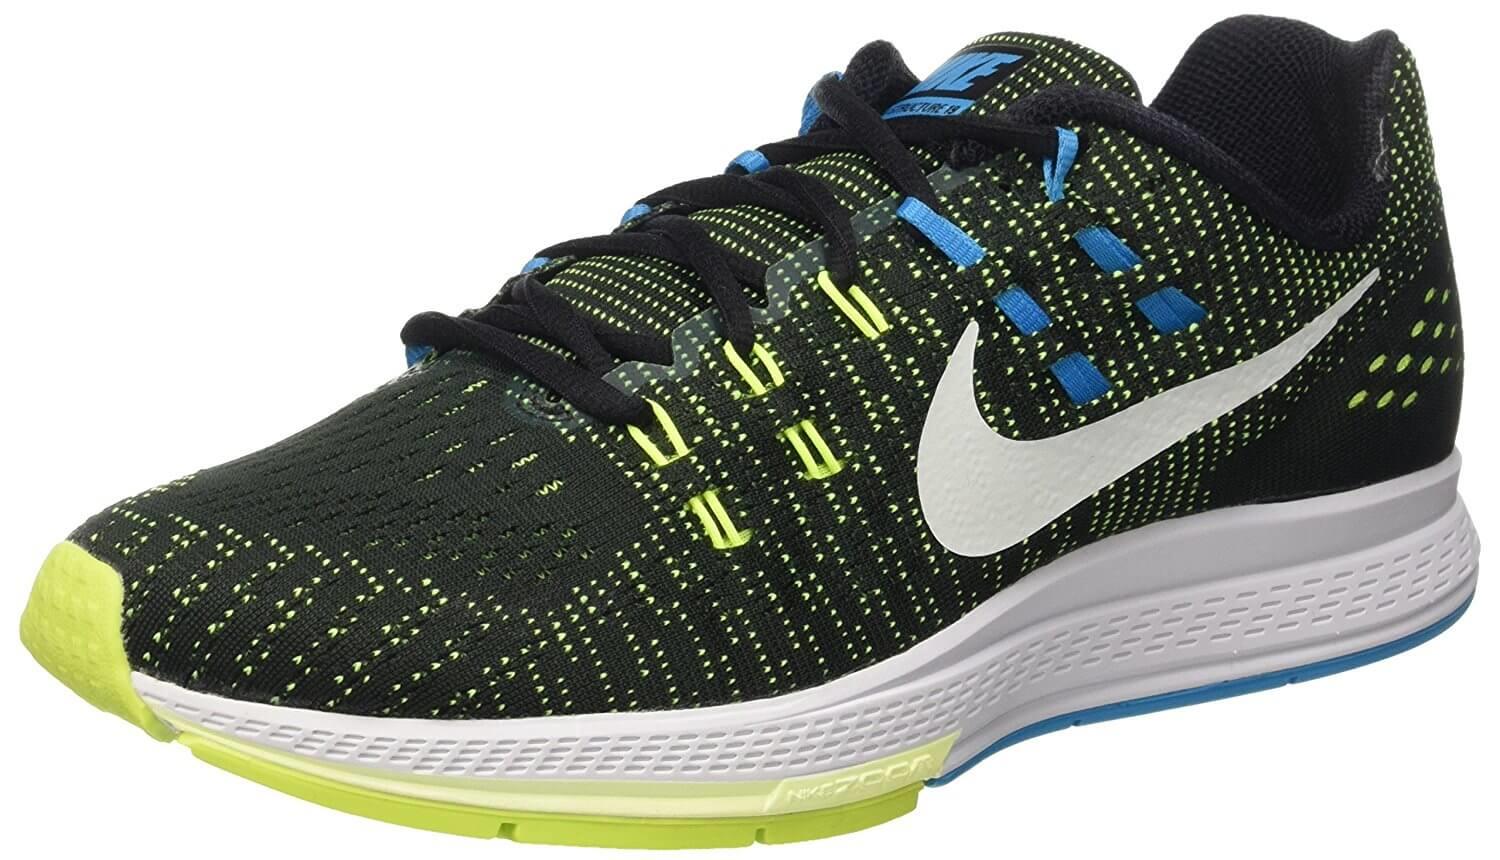 As is custom, the Nike Air Zoom Structure 19 comes in many interesting color schemes.